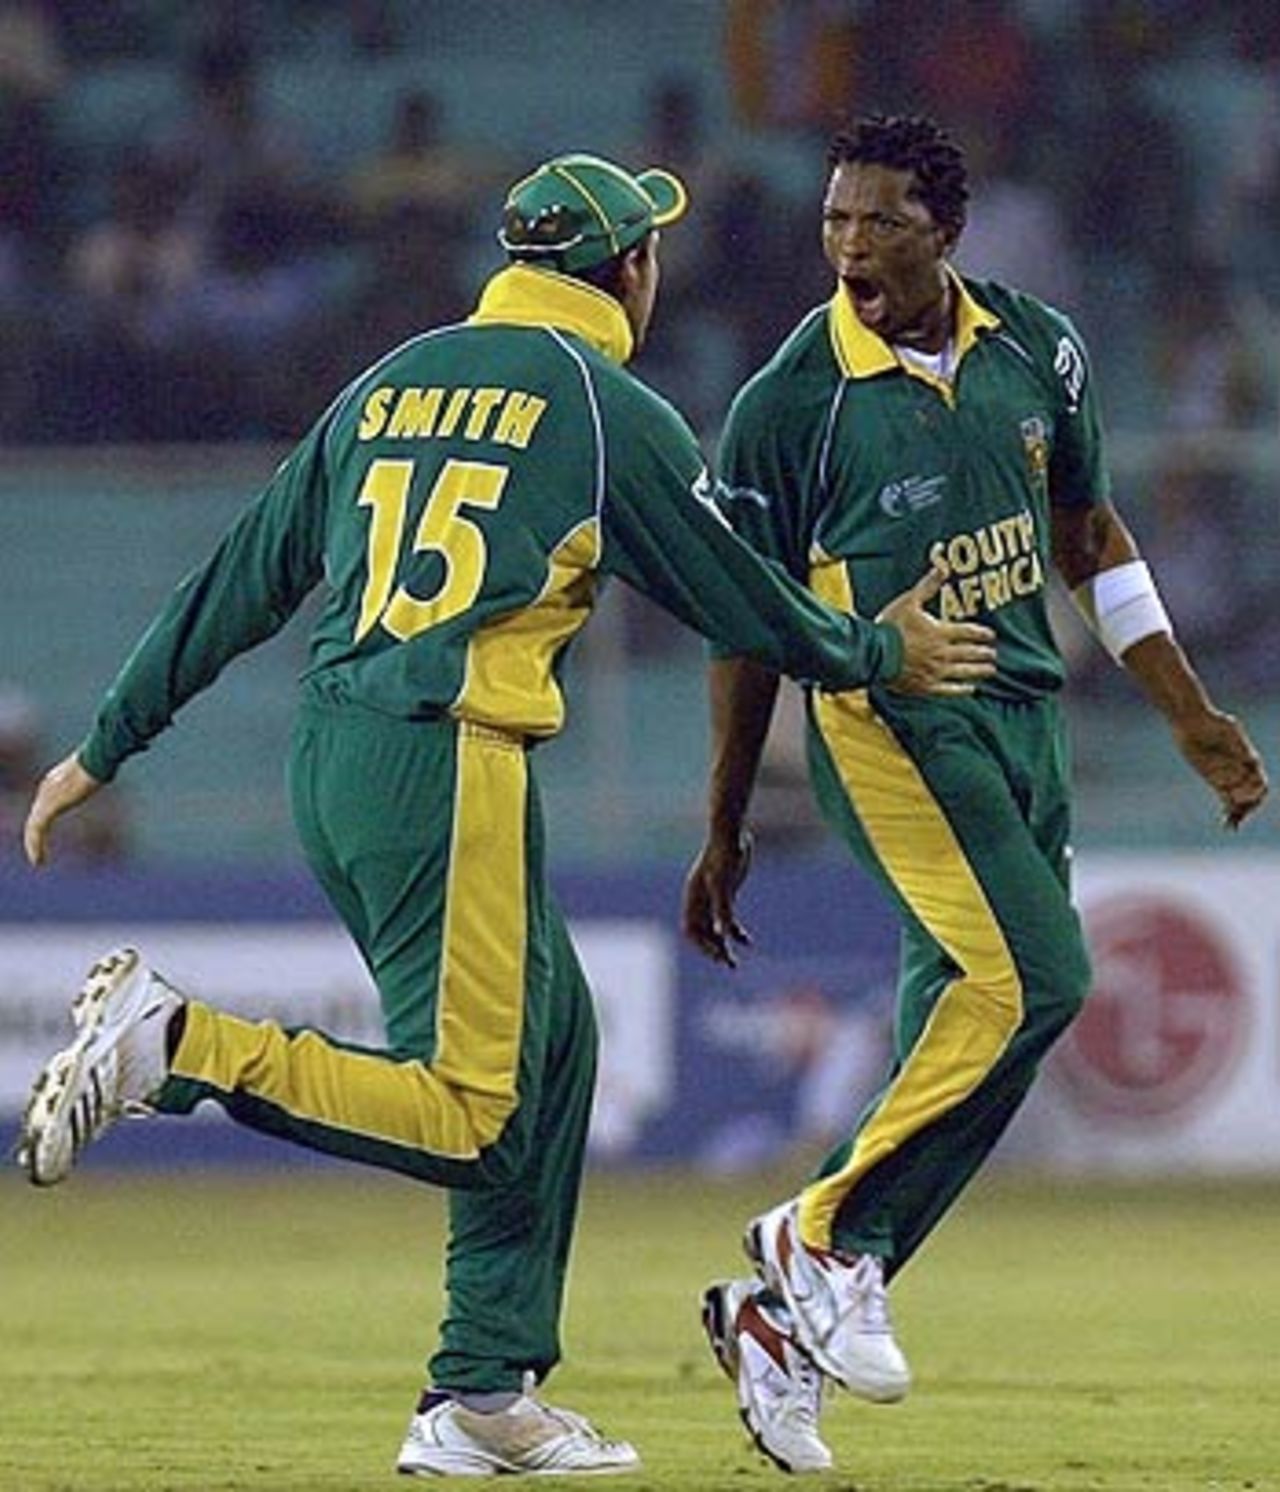 'We got 'im!' - Graeme Smith and Makhaya Ntini celebrate a wicket, South Africa v Sri Lanka, 7th match, Champions Trophy, Ahmedabad, October 24, 2006